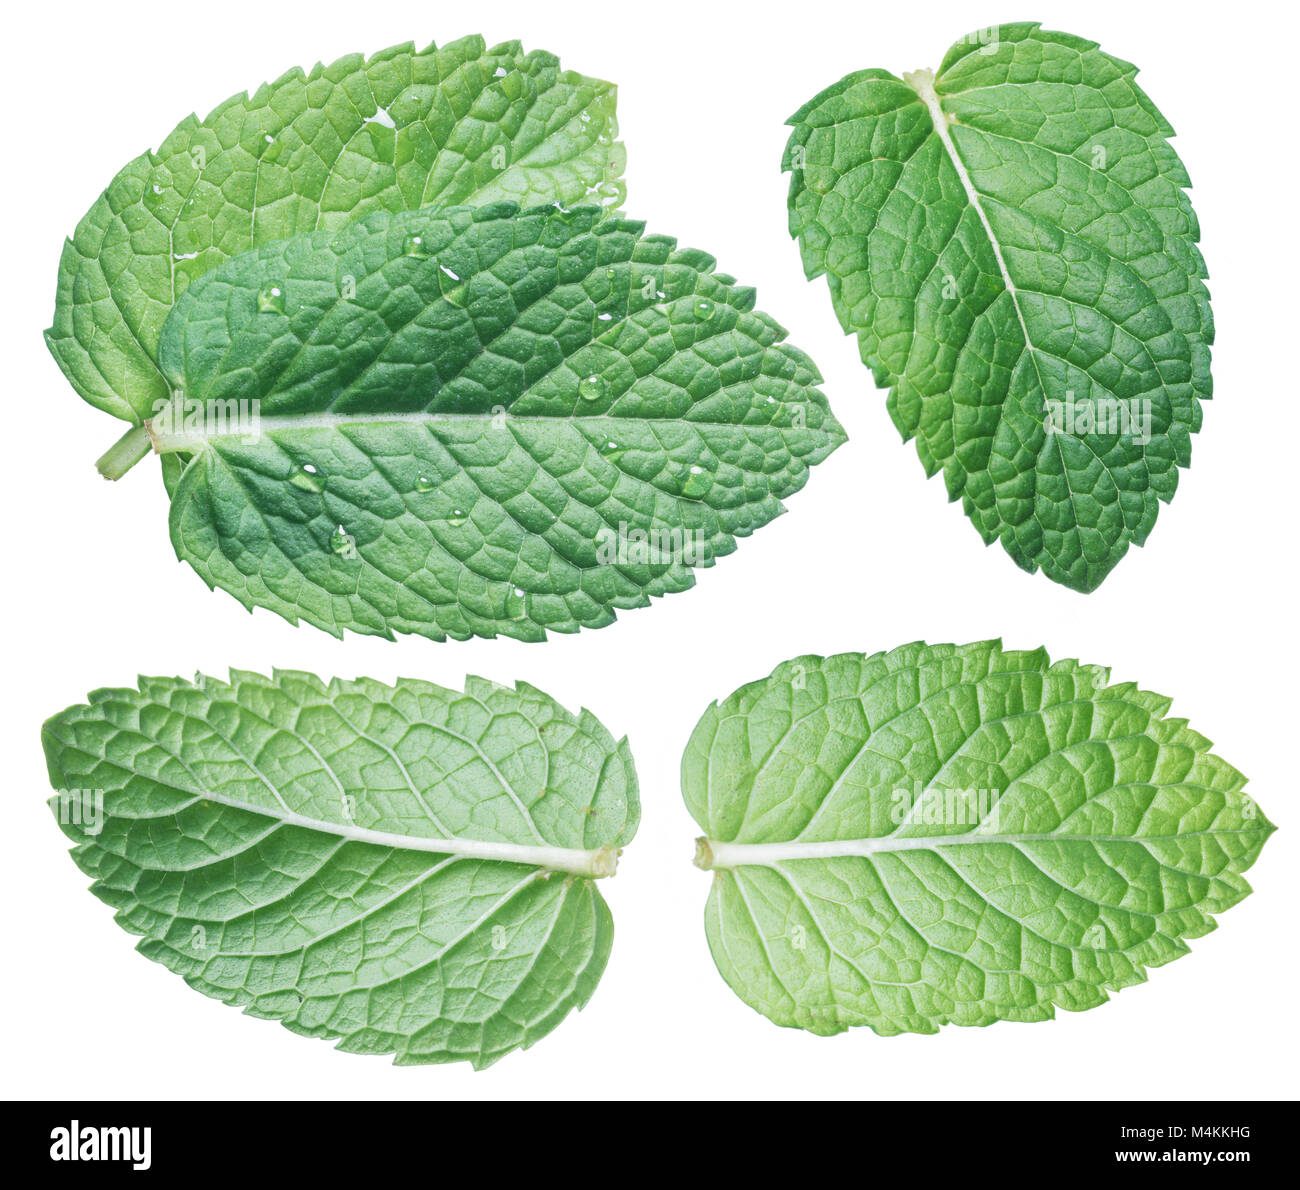 Set of spearmint leaves or mint leaves isolated on white background. Stock Photo